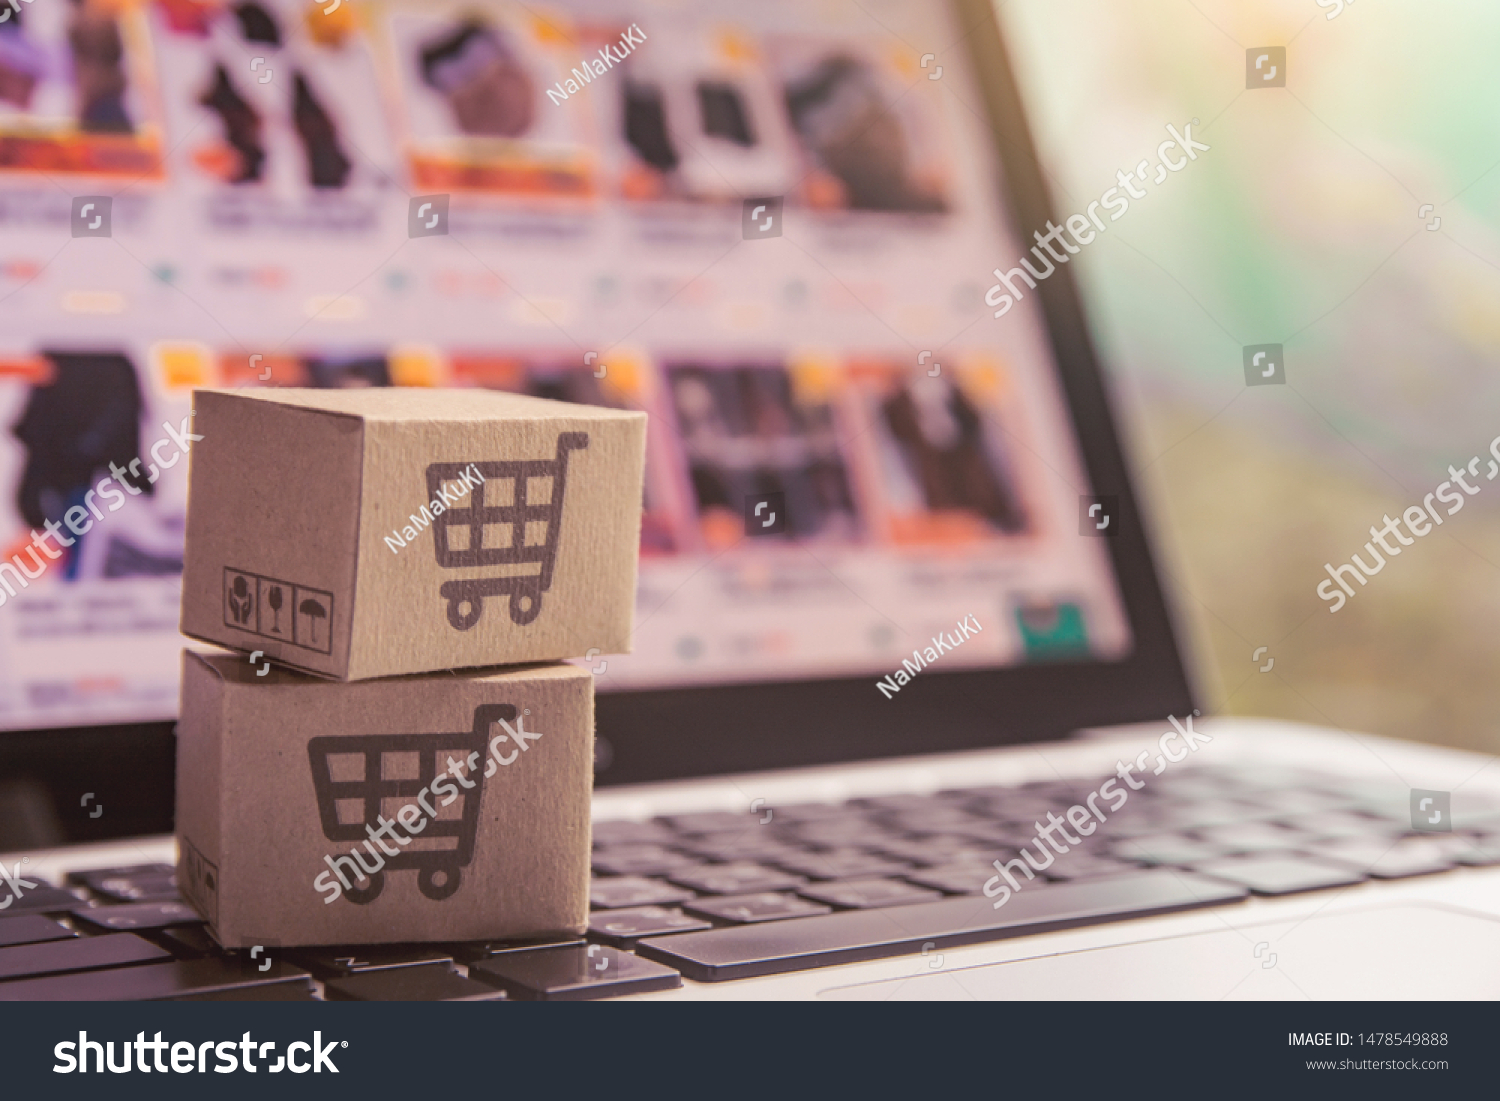 Online shopping - Paper cartons or parcel with a shopping cart logo on a laptop keyboard. Shopping service on The online web and offers home delivery. #1478549888